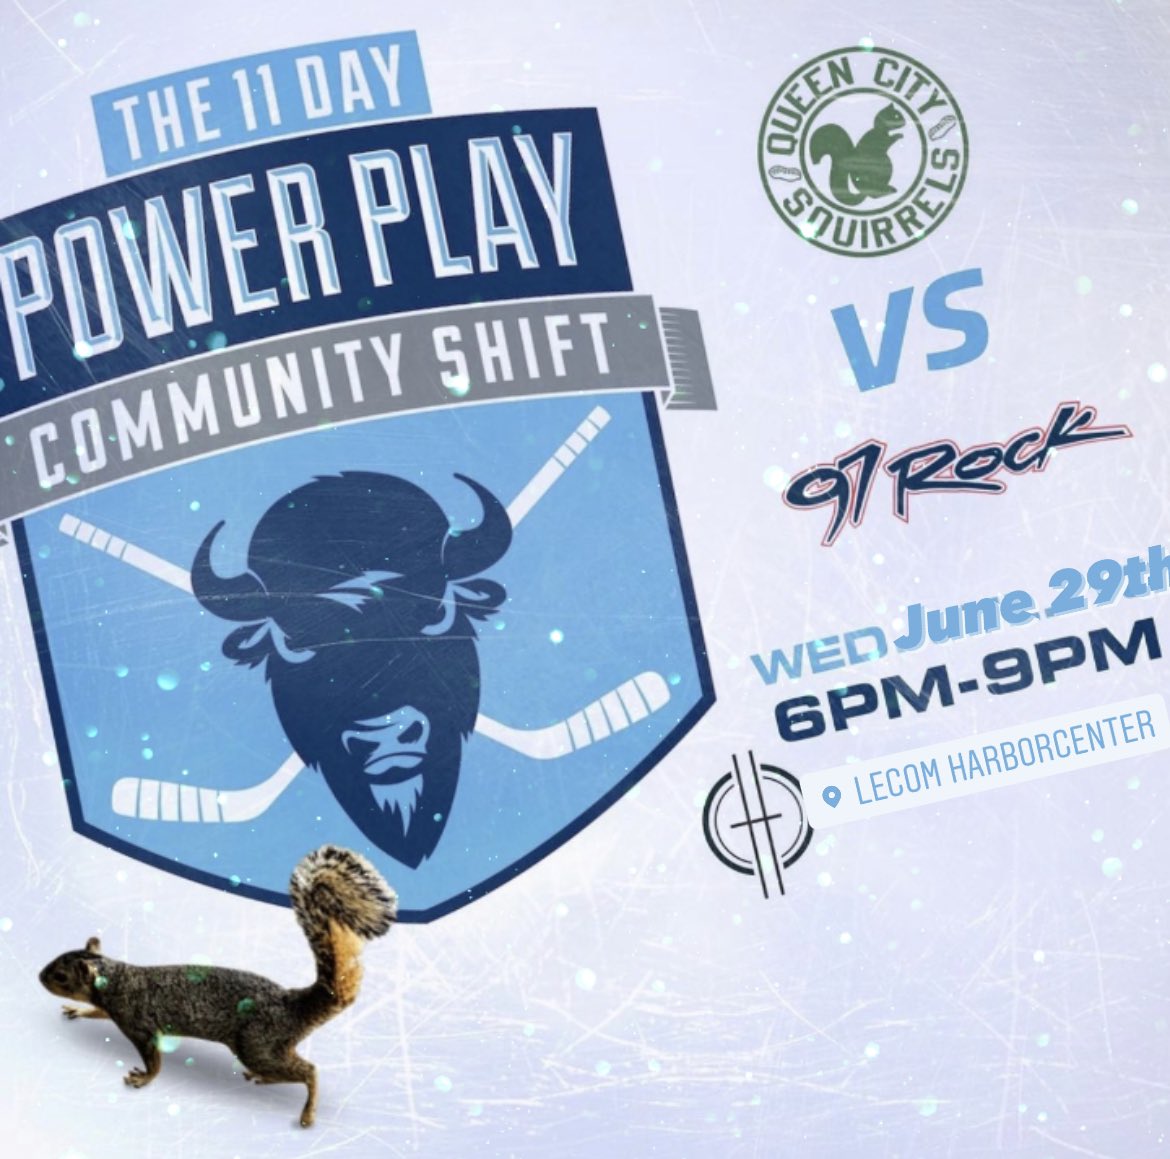 Don’t forget the puck drops this Thursday to start the @11DayPowerPlay Community Shift. Opening ceremonies start at 6pm and then our big rivalry is back against @DJJickster & @97RockBuffalo on June 29th from 6pm - 9pm!! #GoNuts #PuttingCancerOnIce